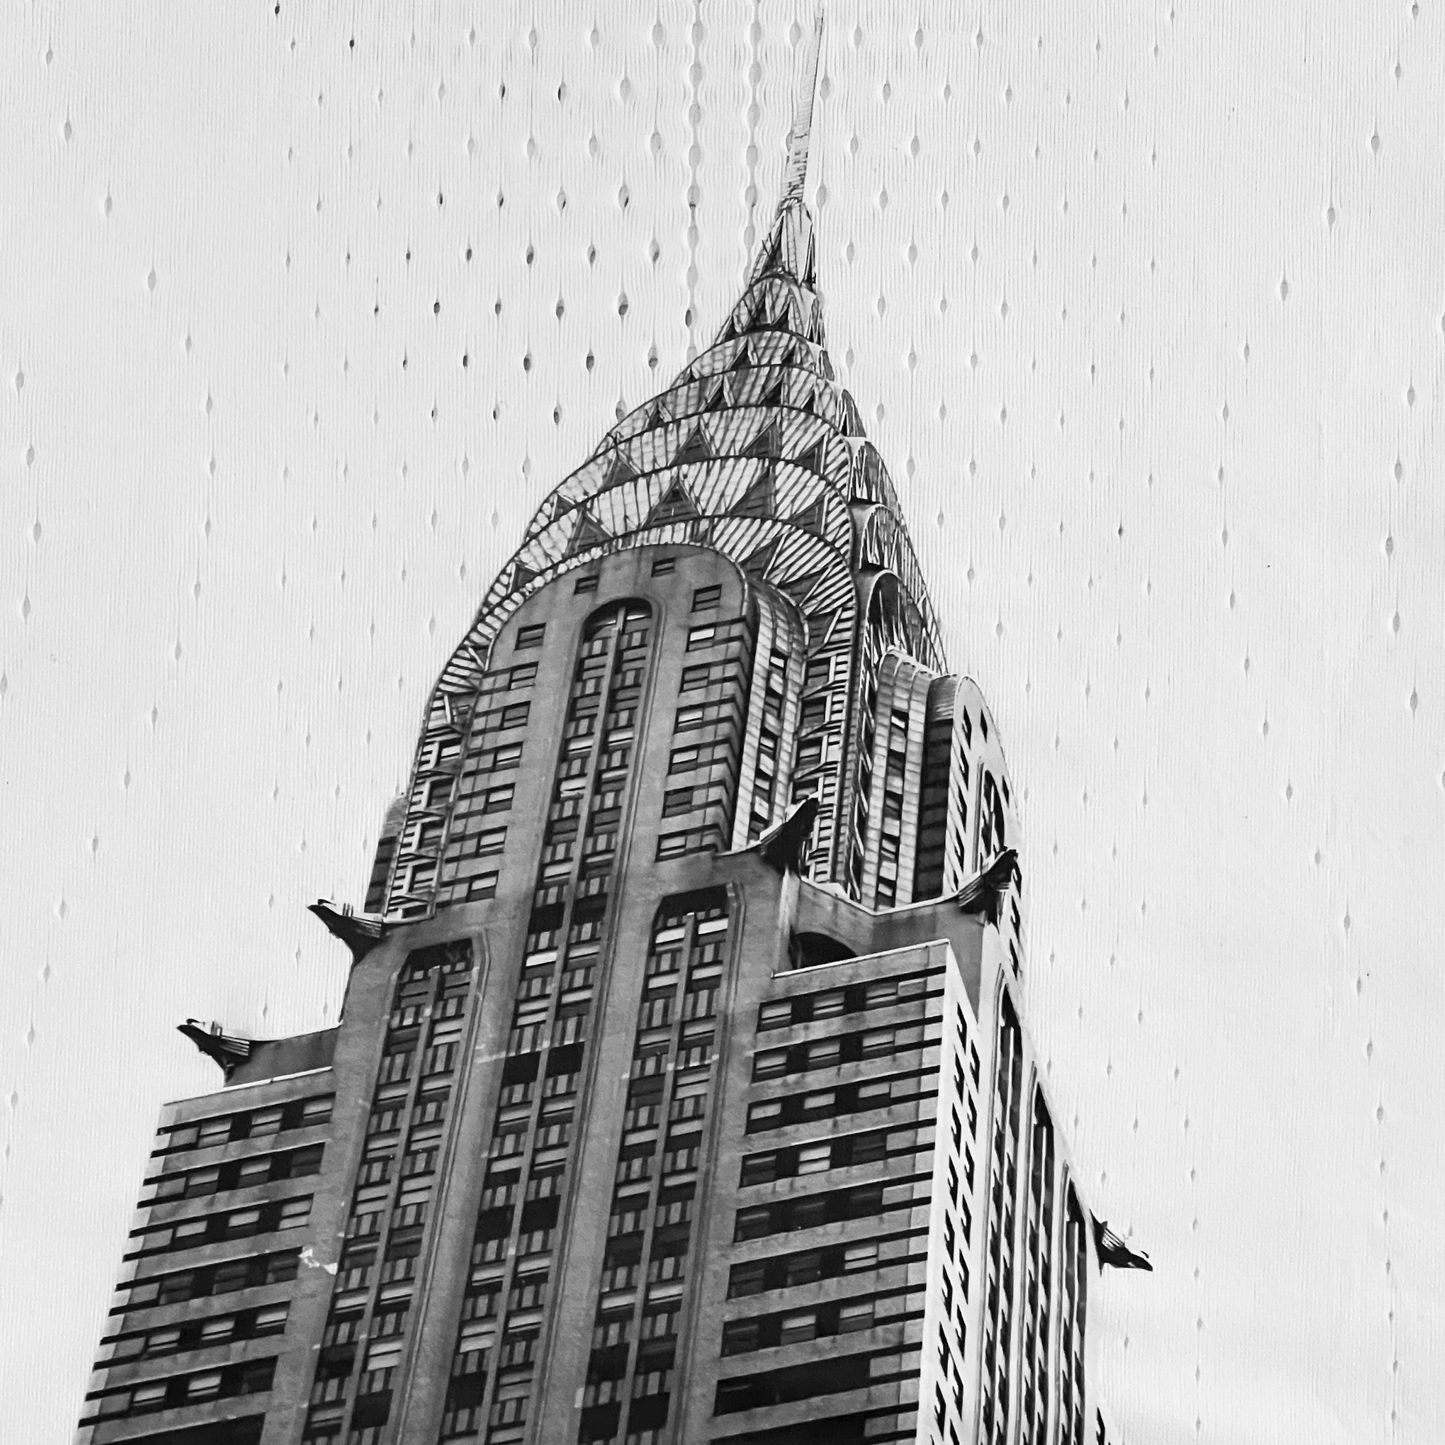 NYC - Architectural Series Tank - Chrysler Building